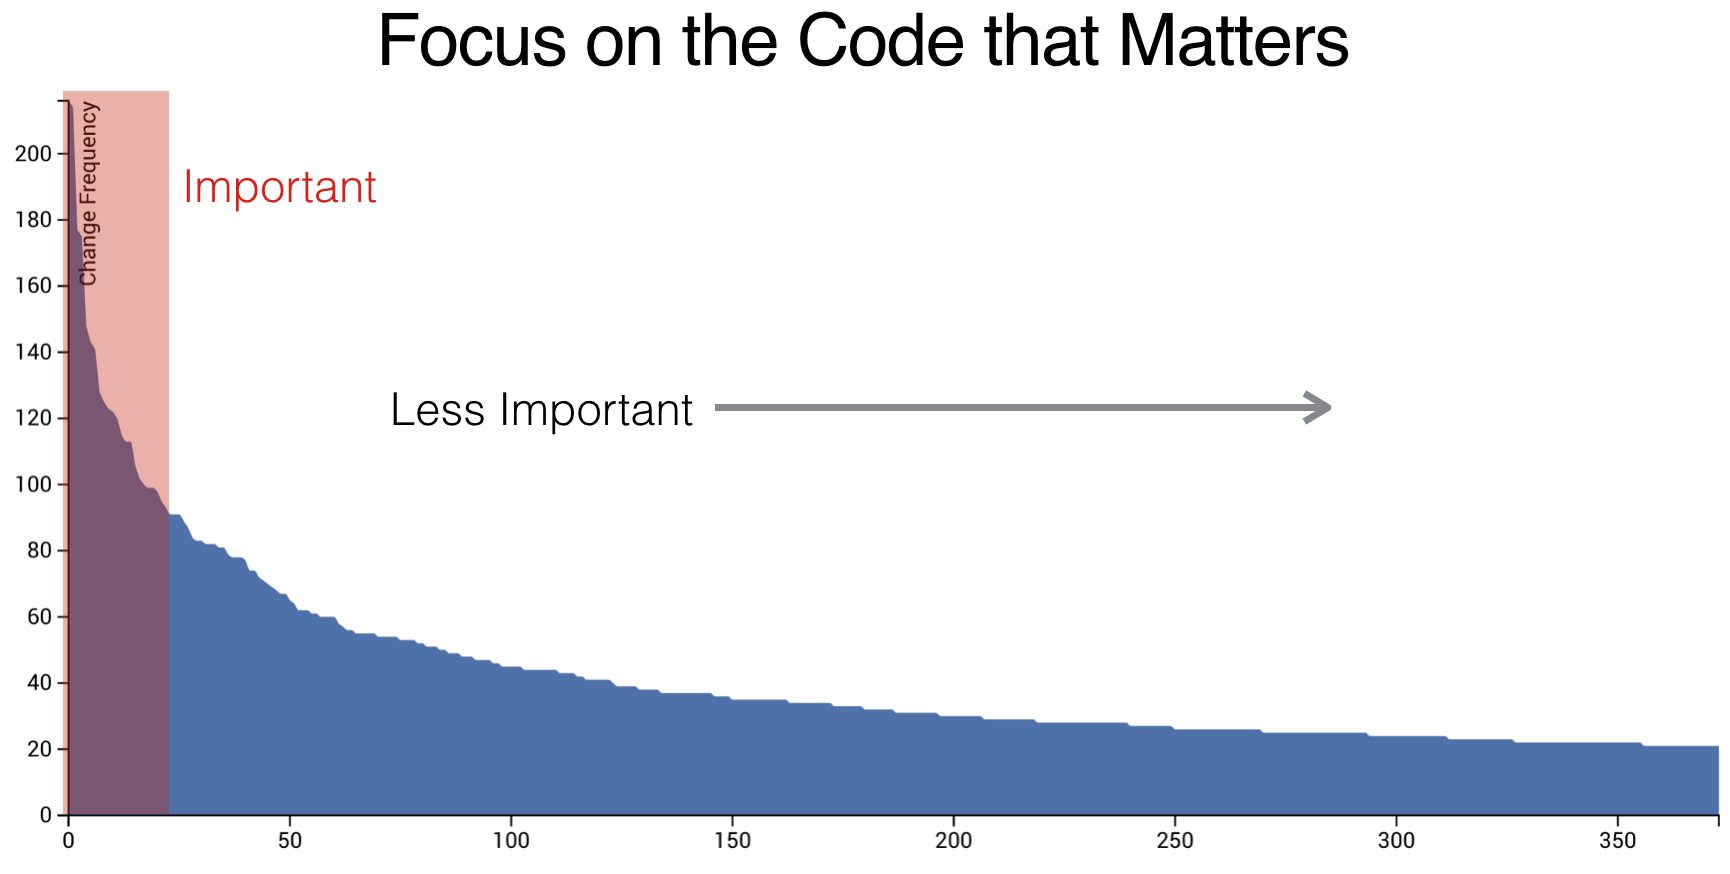 Focus on the code that matters